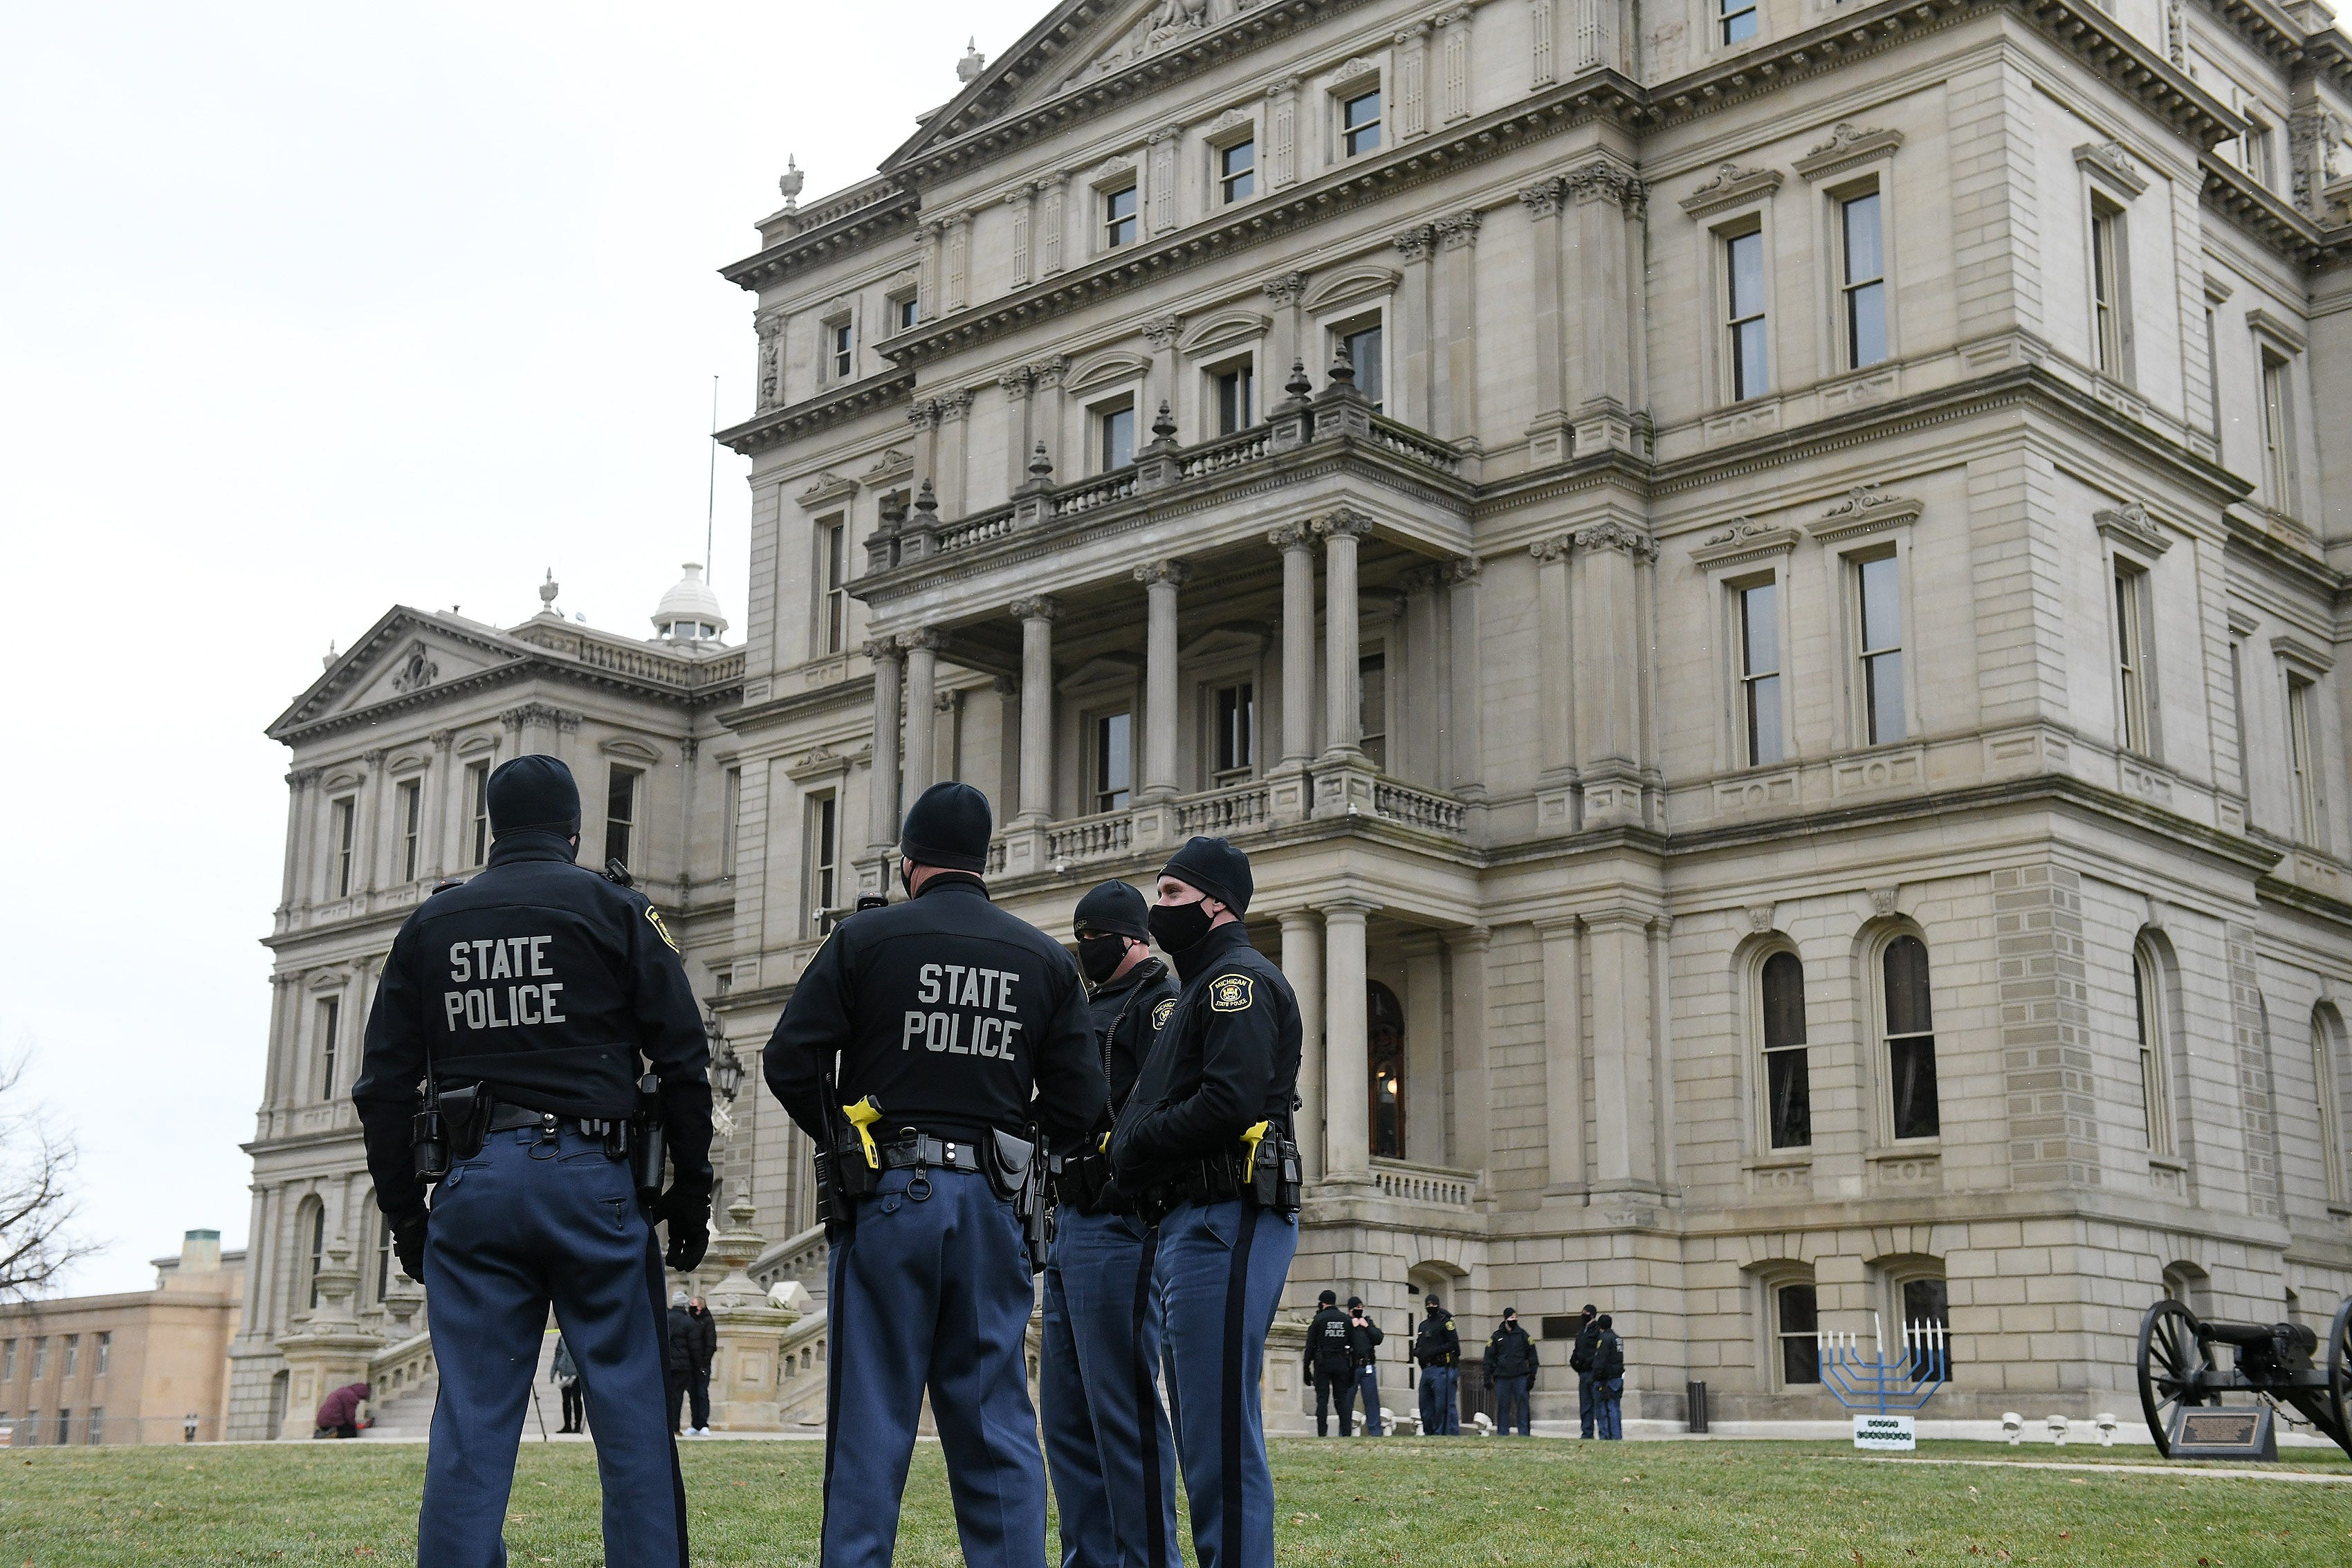 Michigan State Police officers on duty around a largely empty area surrounding the Michigan State Capitol in Lansing, Mich. on Dec. 14, 2020.   The electors are casting their votes today at the capitol for the president and vice president.